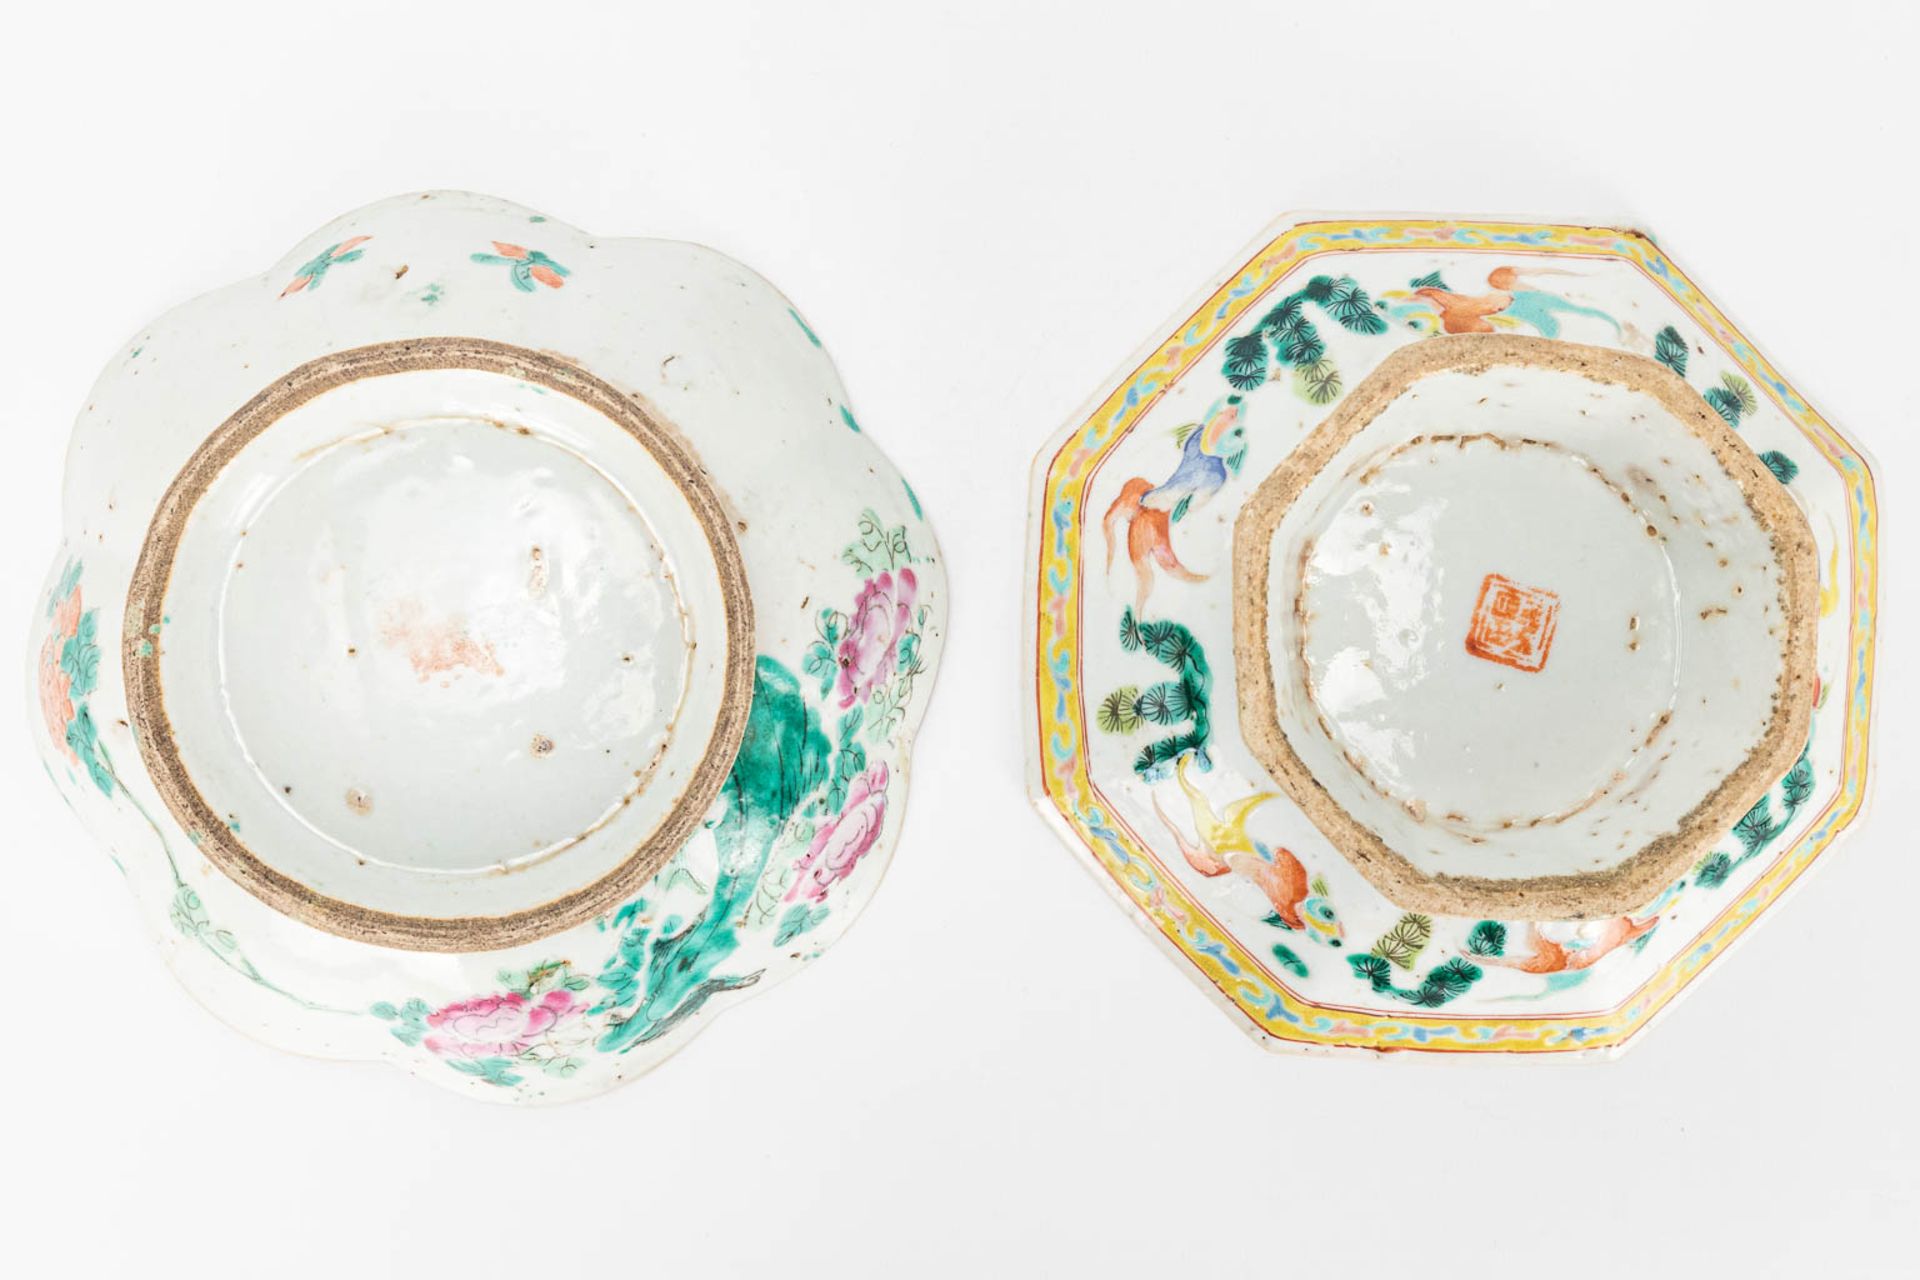 A set of 4 items made of Chinese porcelain. 2 small bowls and 2 ginger jars without lids. - Image 15 of 23